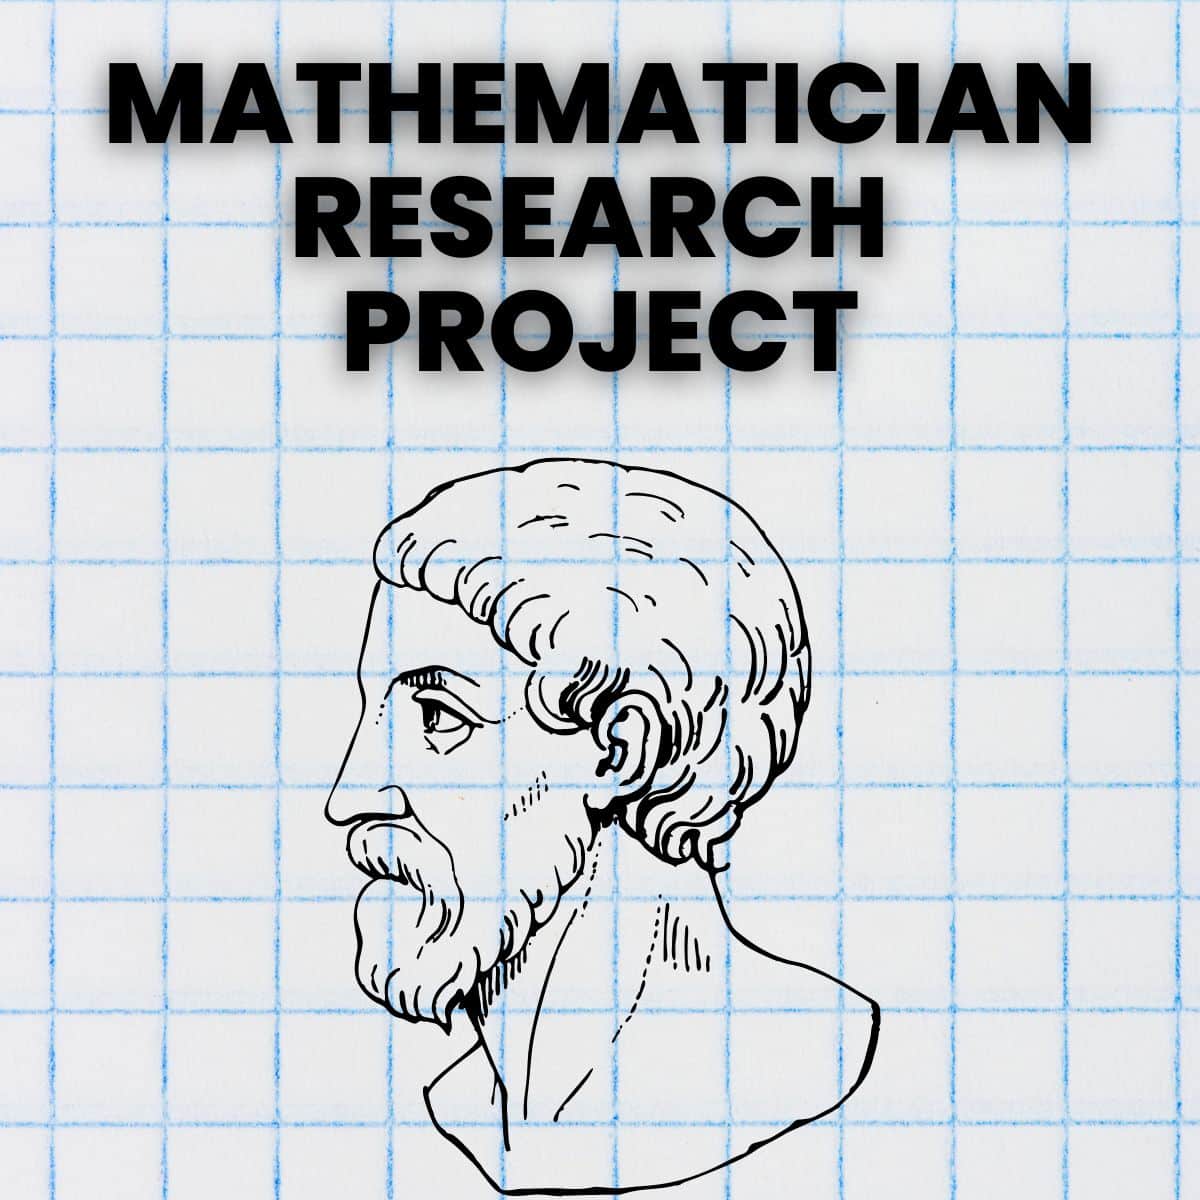 pencil drawing of mathematician with text "mathematician research project" 